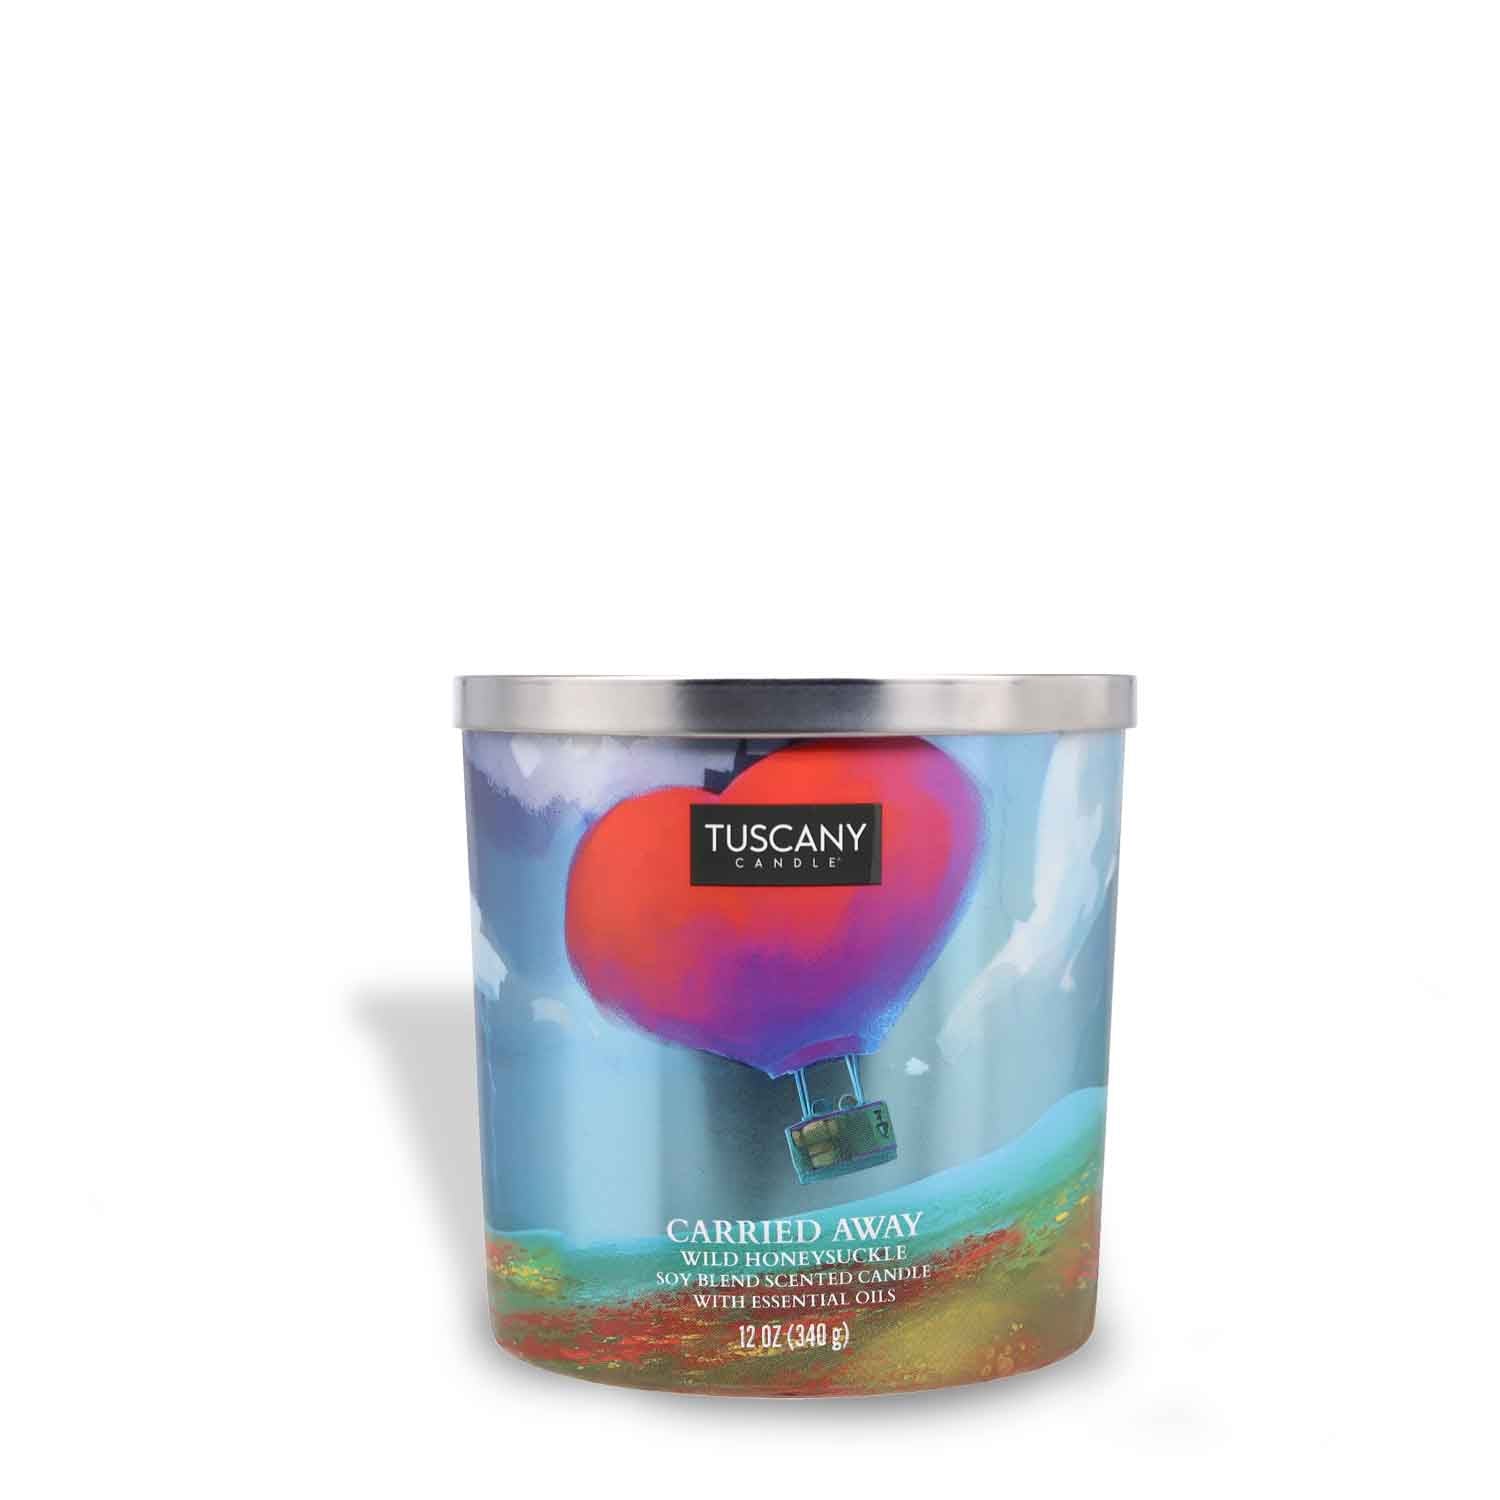 A dreamy Carried Away Scented Jar Candle (12 oz) from the Carried Away Collection with an image of a hot air balloon.